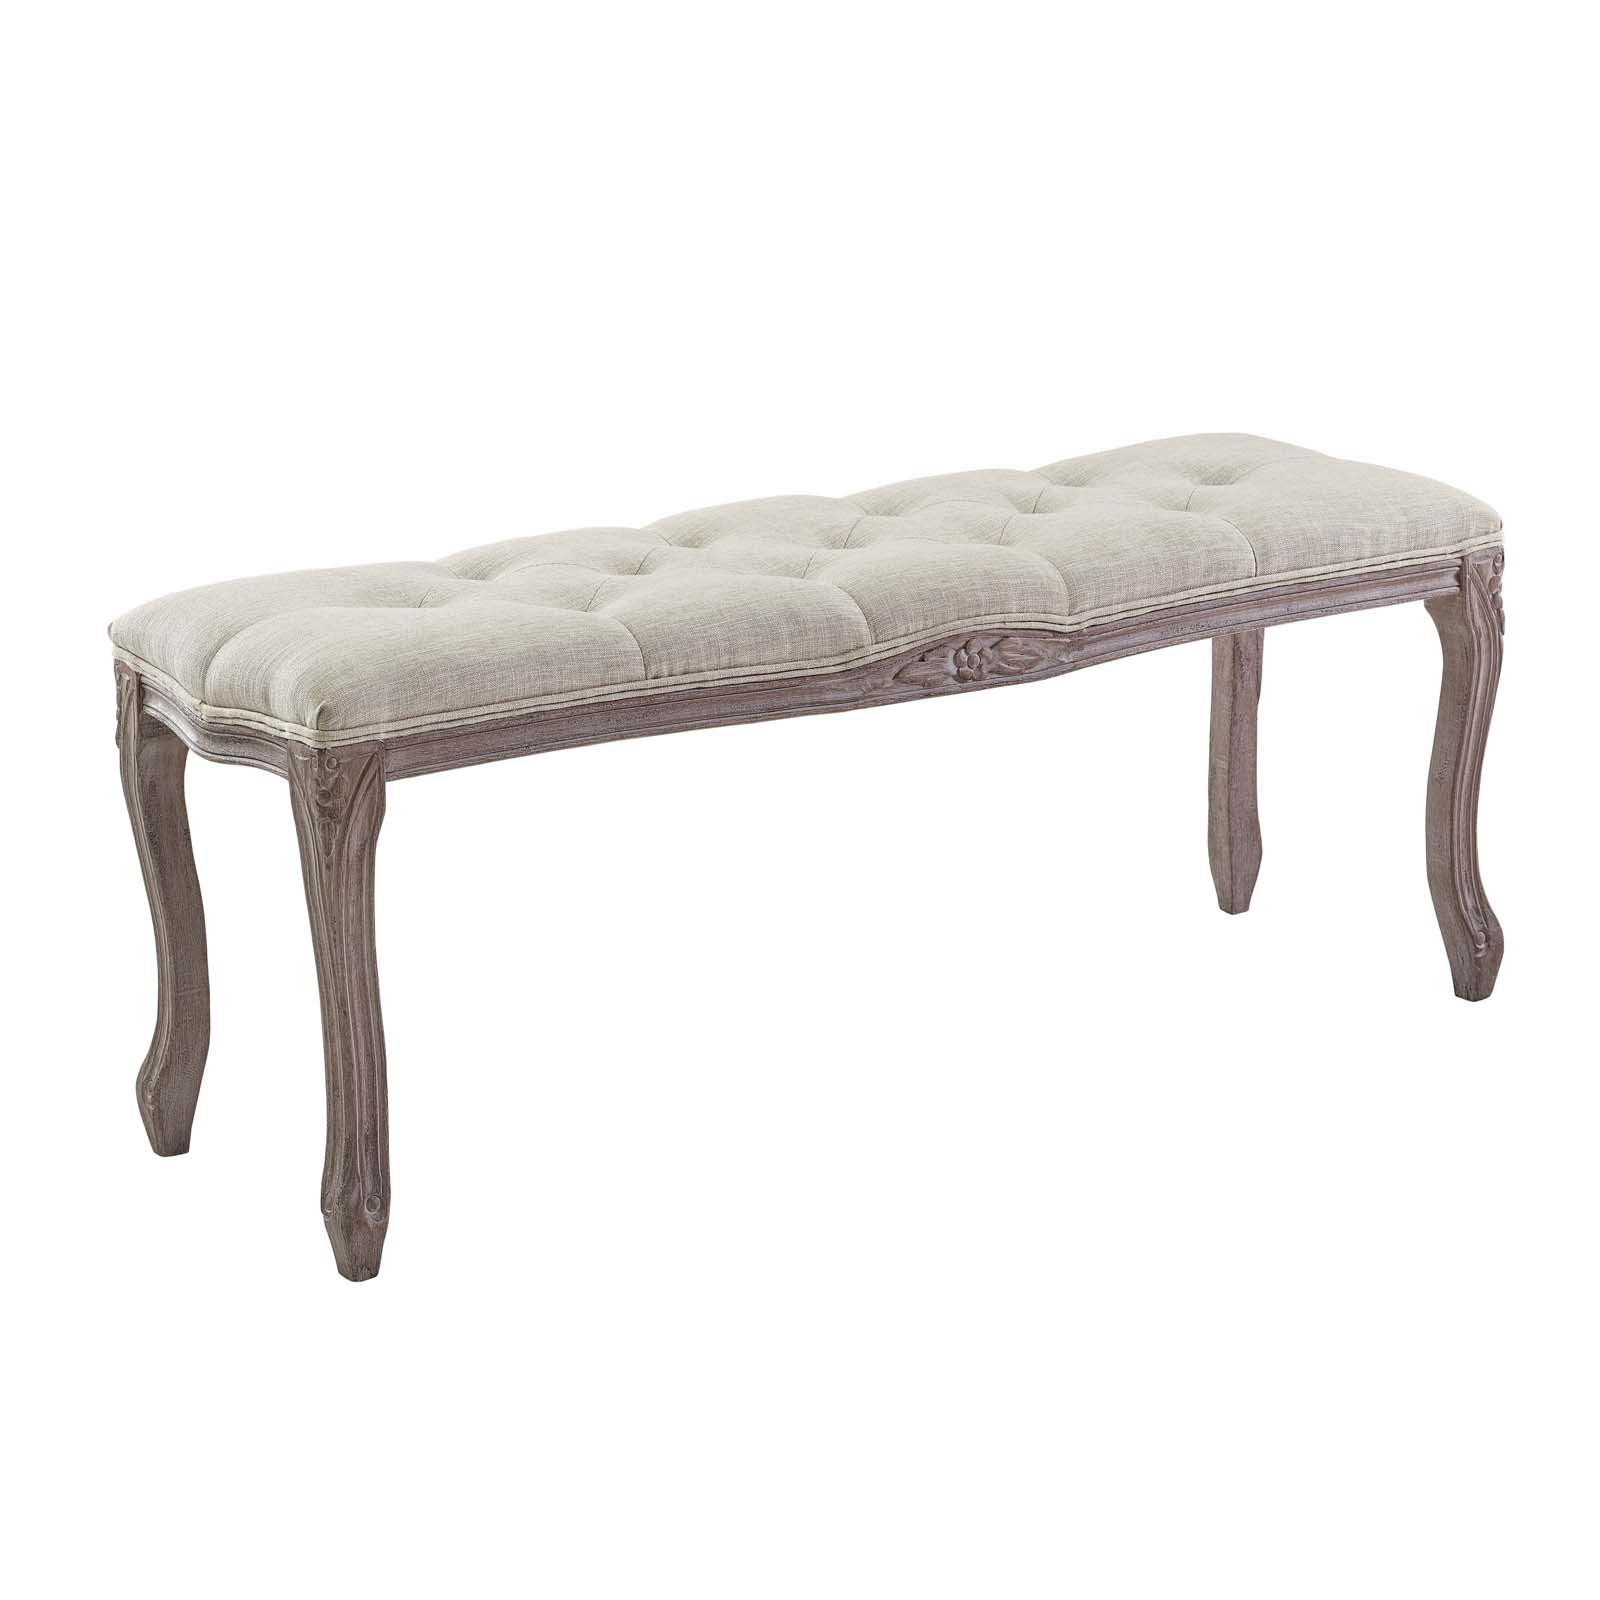 Modway Benches - Regal Vintage French Upholstered Fabric Bench Beige